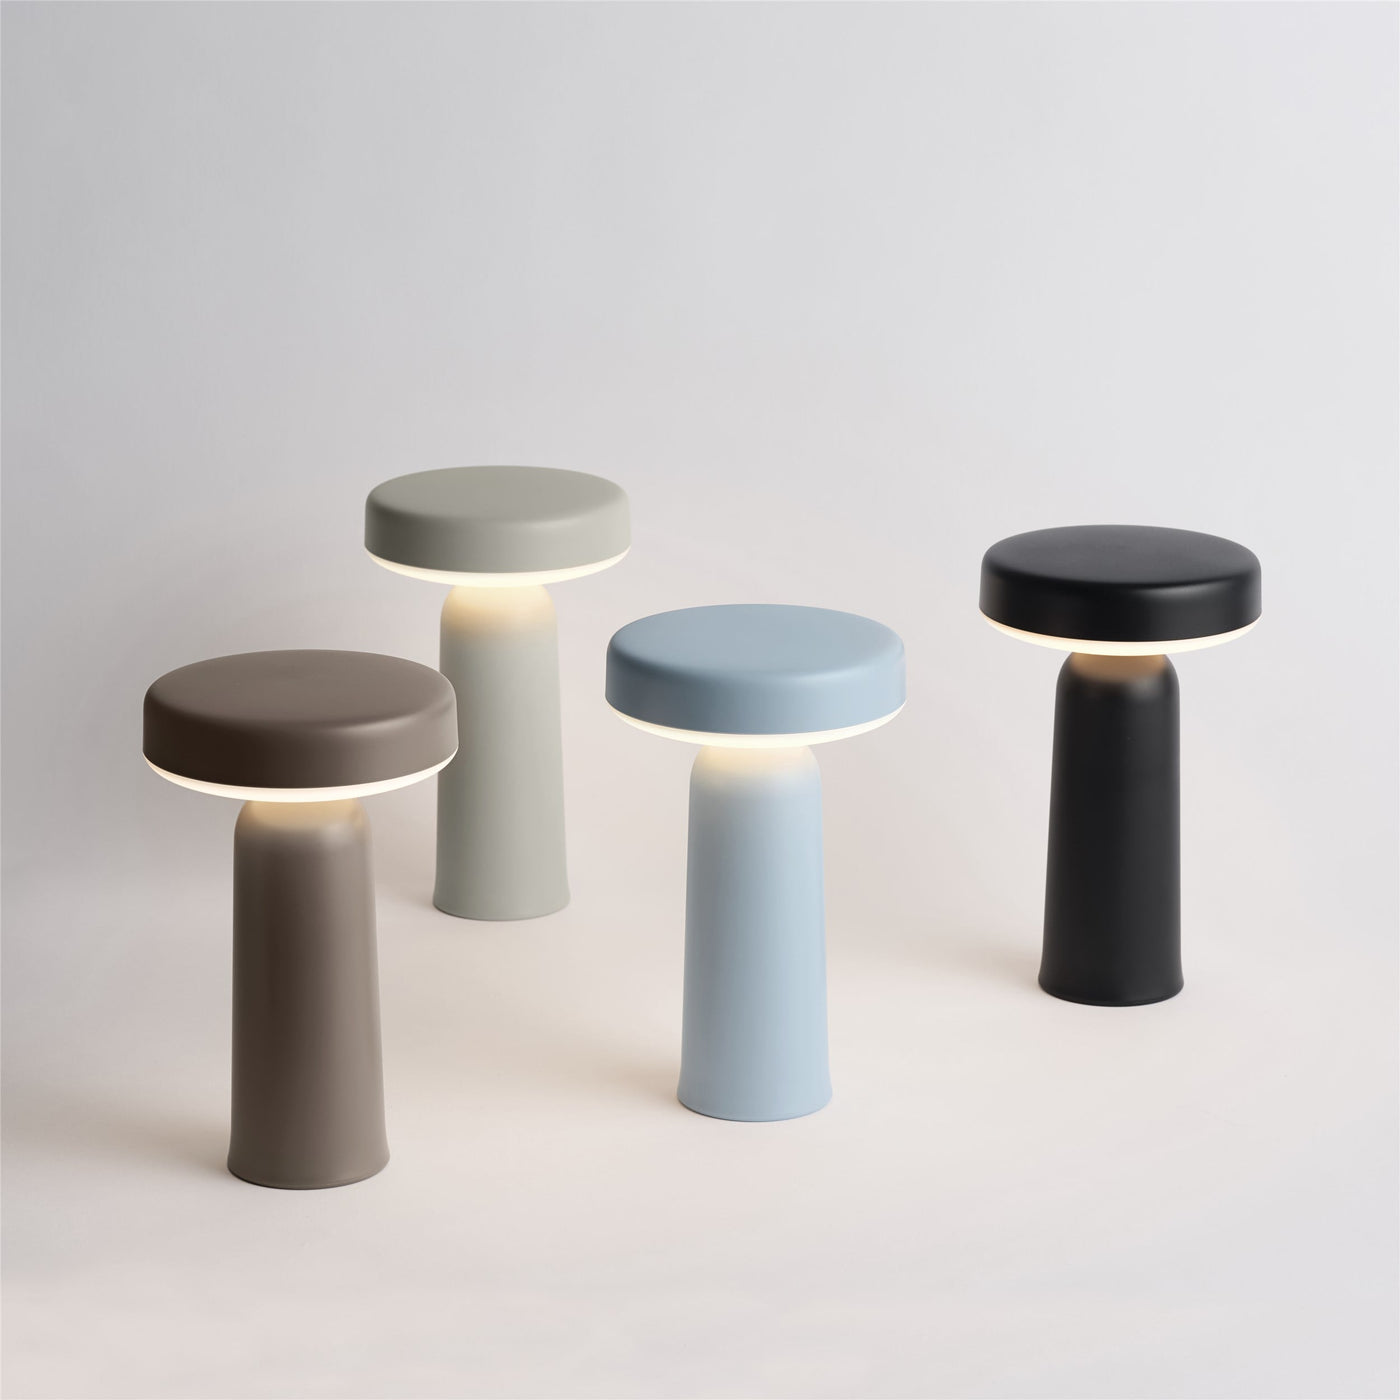 Muuto Ease Portable Lamp. Free UK delivery at someday designs. #colour_grey